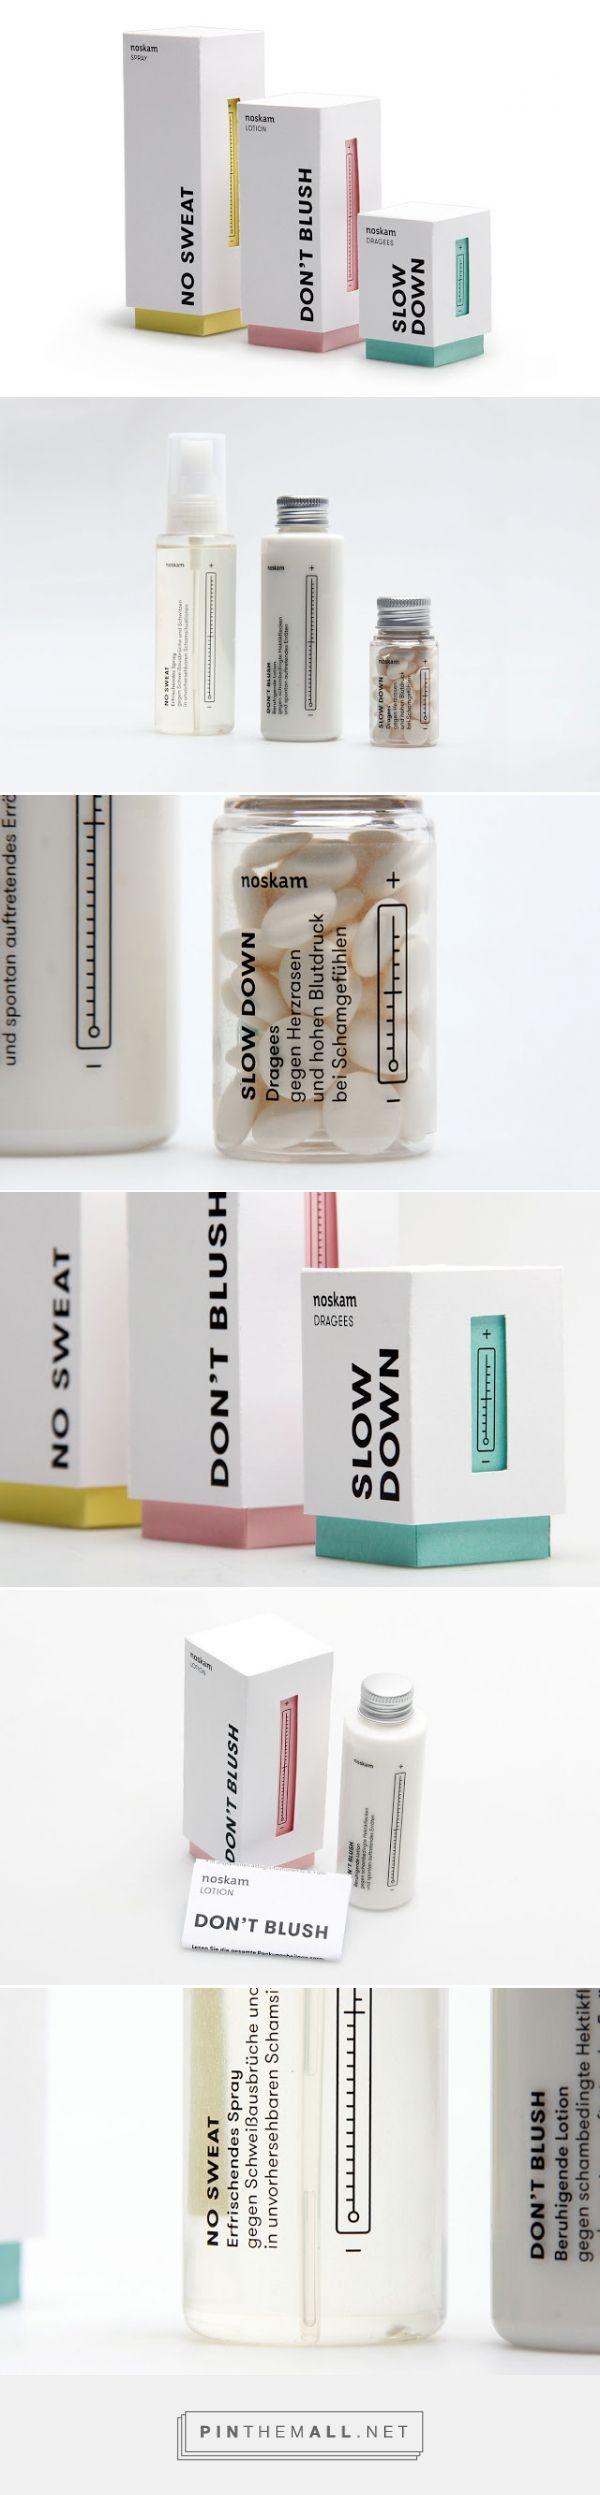 Wedding - Noskam Student Packaging Concept Designed By Muskat (Germany) - Http://www.packagingoftheworld.com/2016/01/noskam-student-project.html... - A Grouped Images Picture